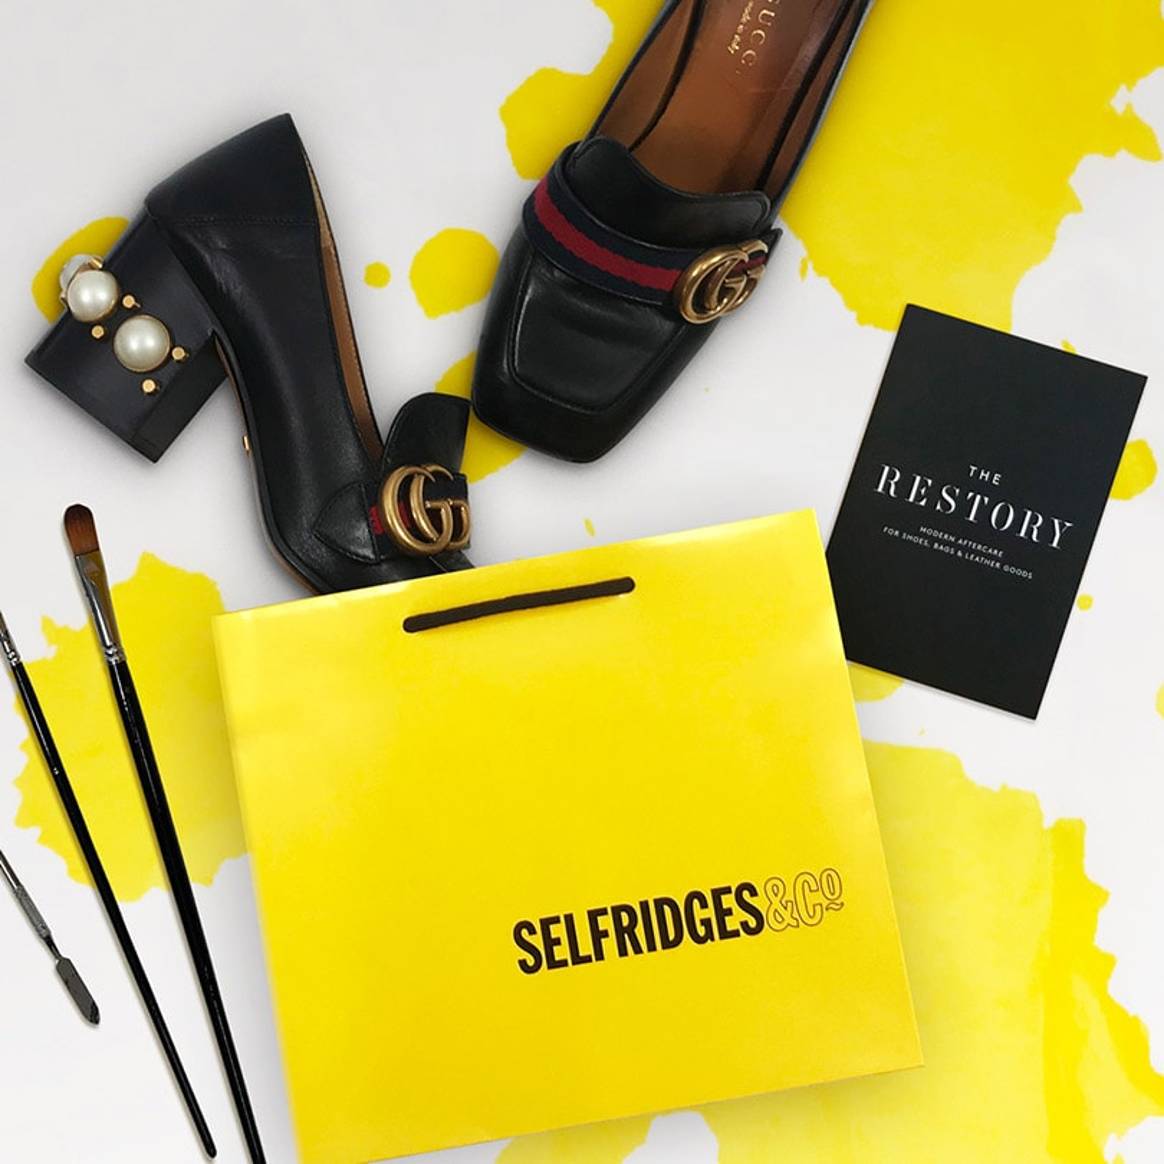 The Restory launches online with Selfridges